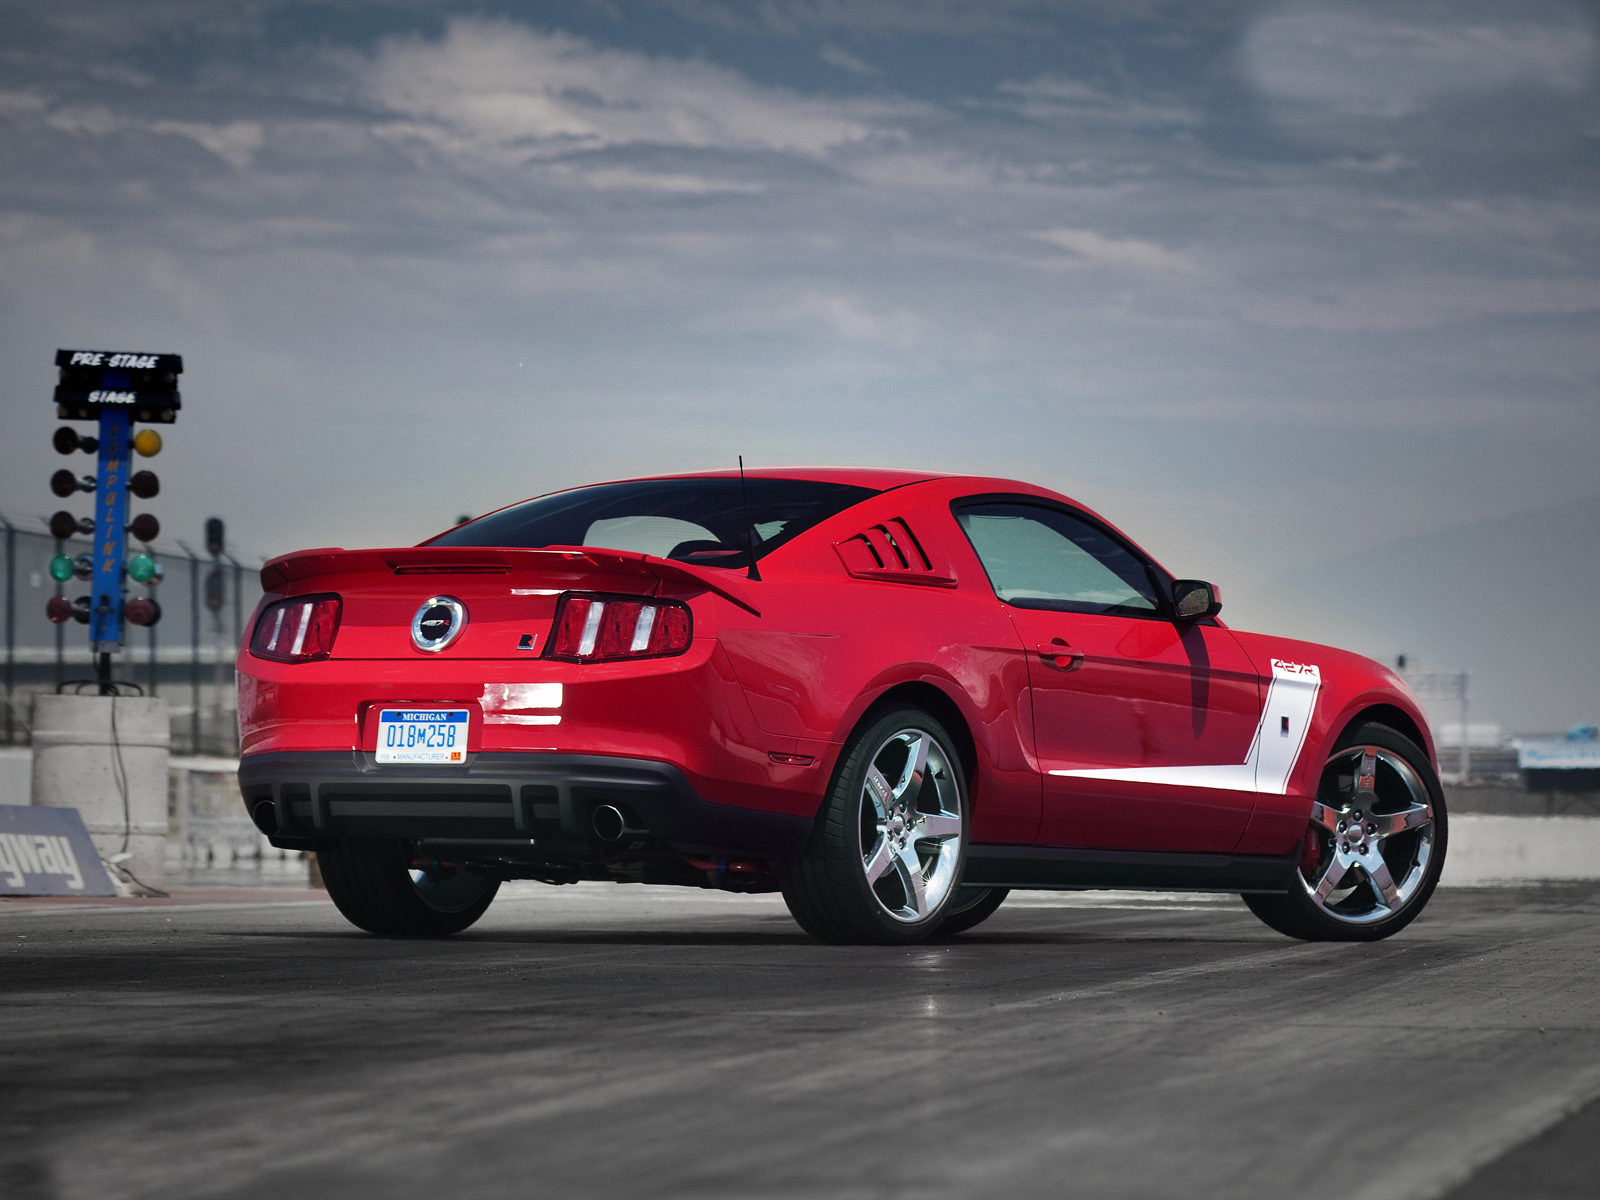 2010, Roush, Ford, Mustang, 427r, Muscle, Gs Wallpaper